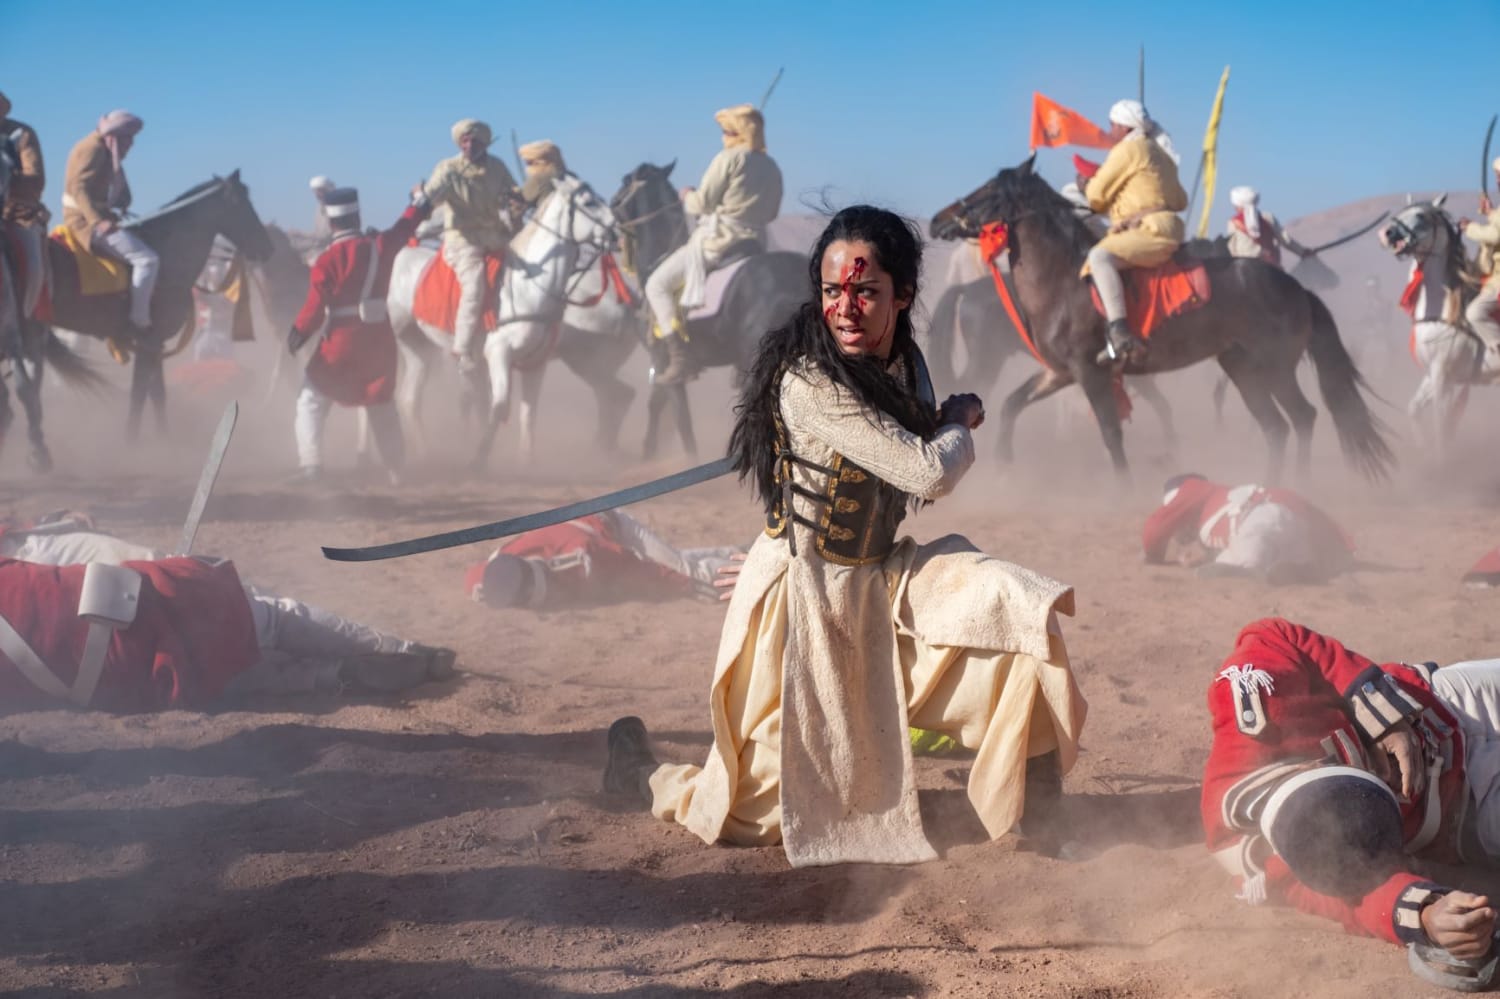 Brave Horse Porn - Warrior Queen of Jhansi' brings a legendary Indian royal to the big screen